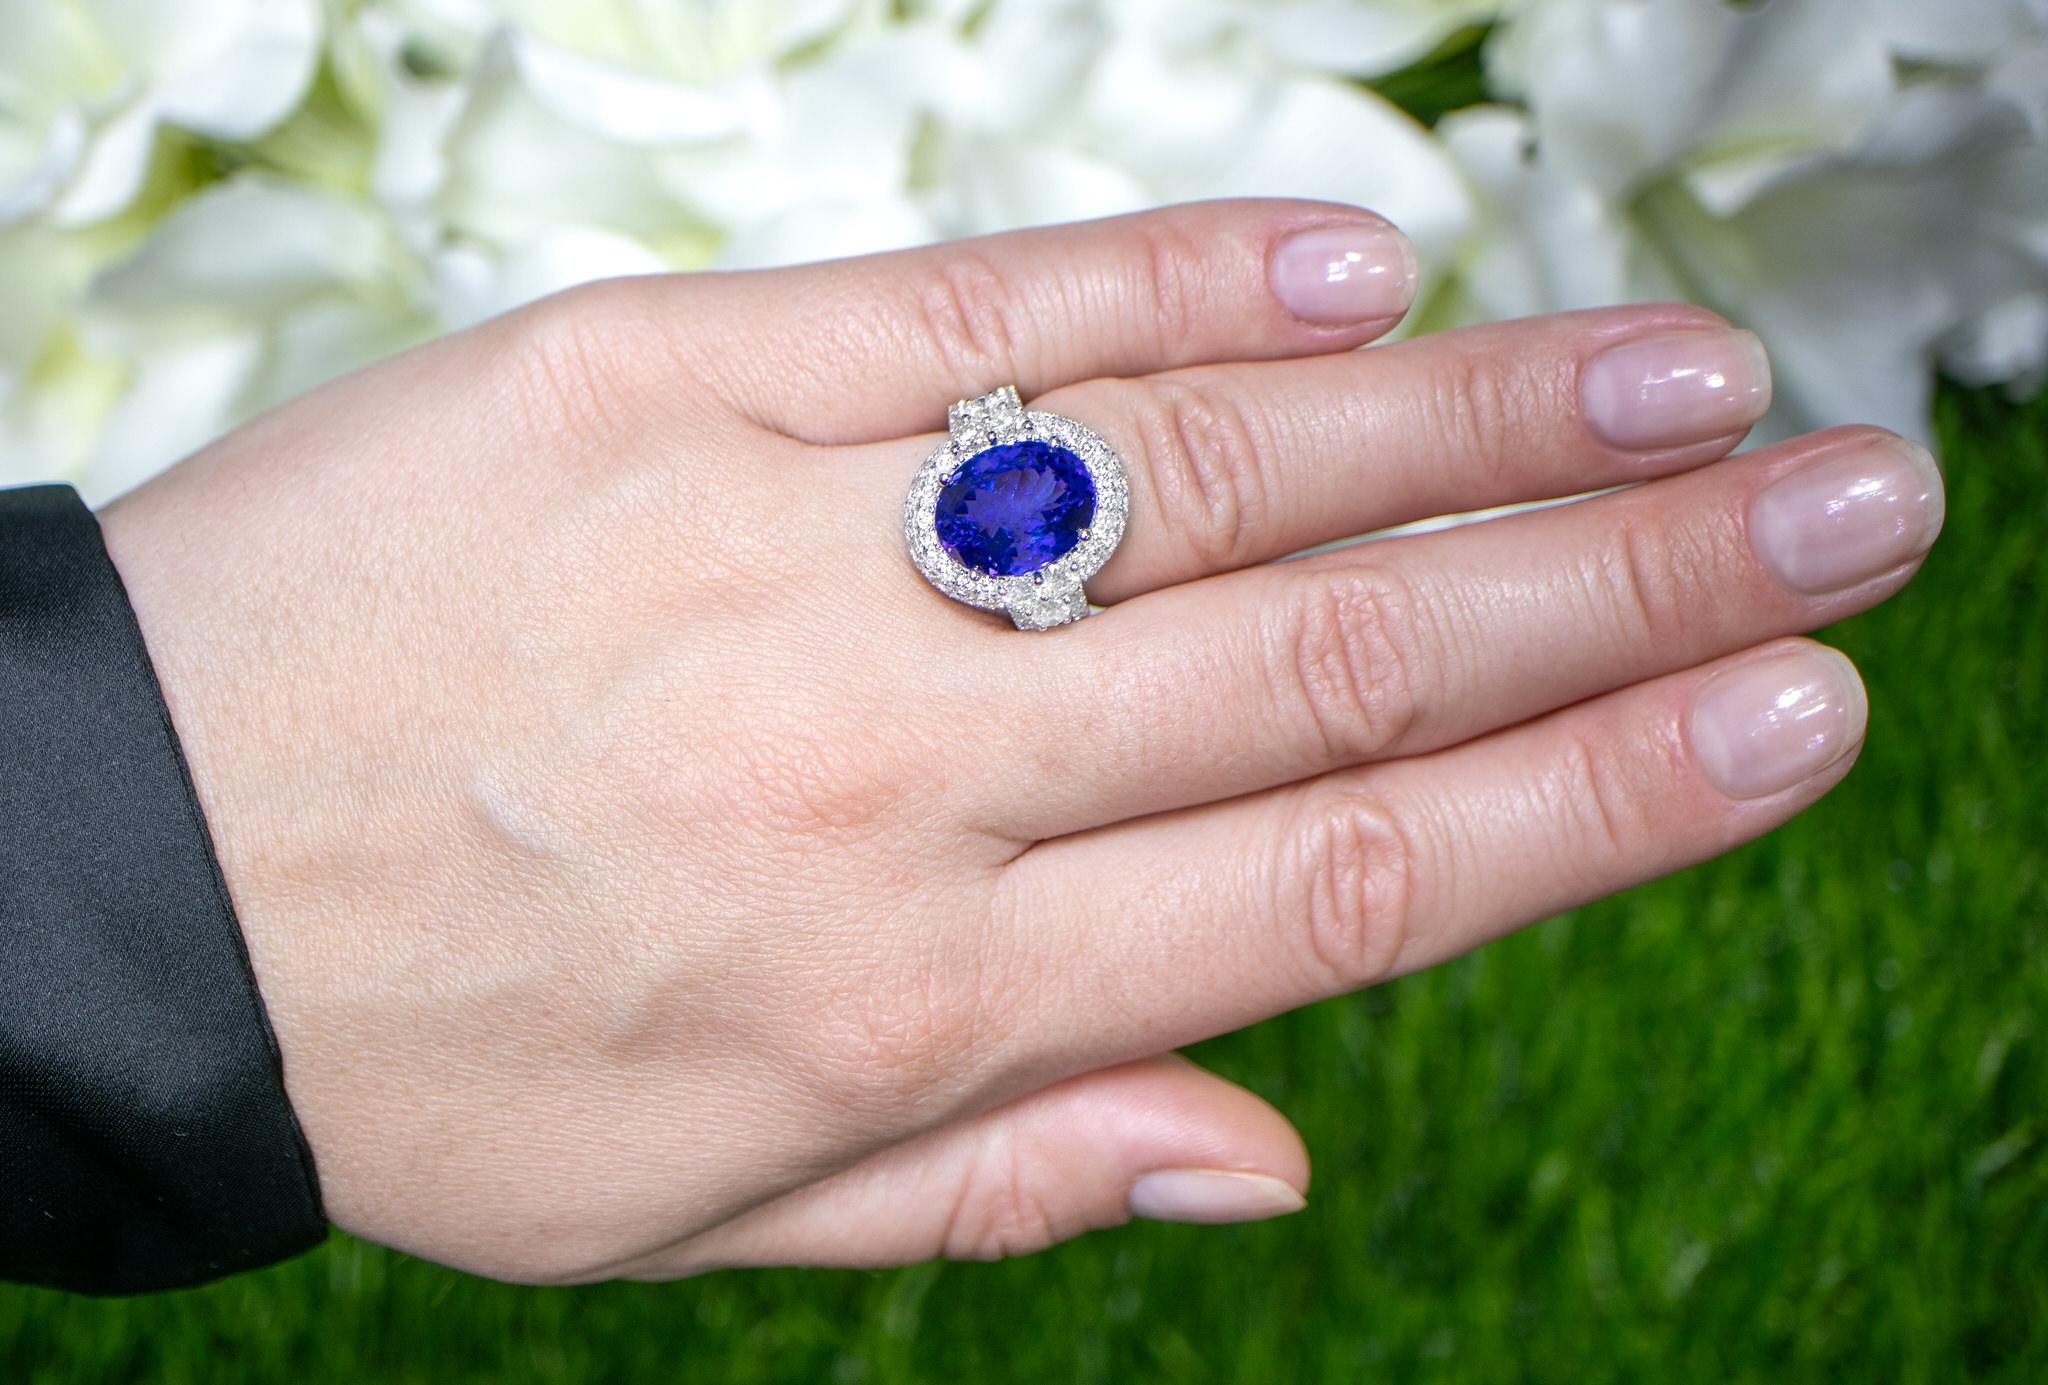 It comes with the Gemological Appraisal by GIA GG/AJP
All Gemstones are Natural
Tanzanite = 6.66 Carats
Diamonds = 2.70 Carats
Metal: 18K White Gold
Ring Size: 6.25* US
*It can be resized complimentary